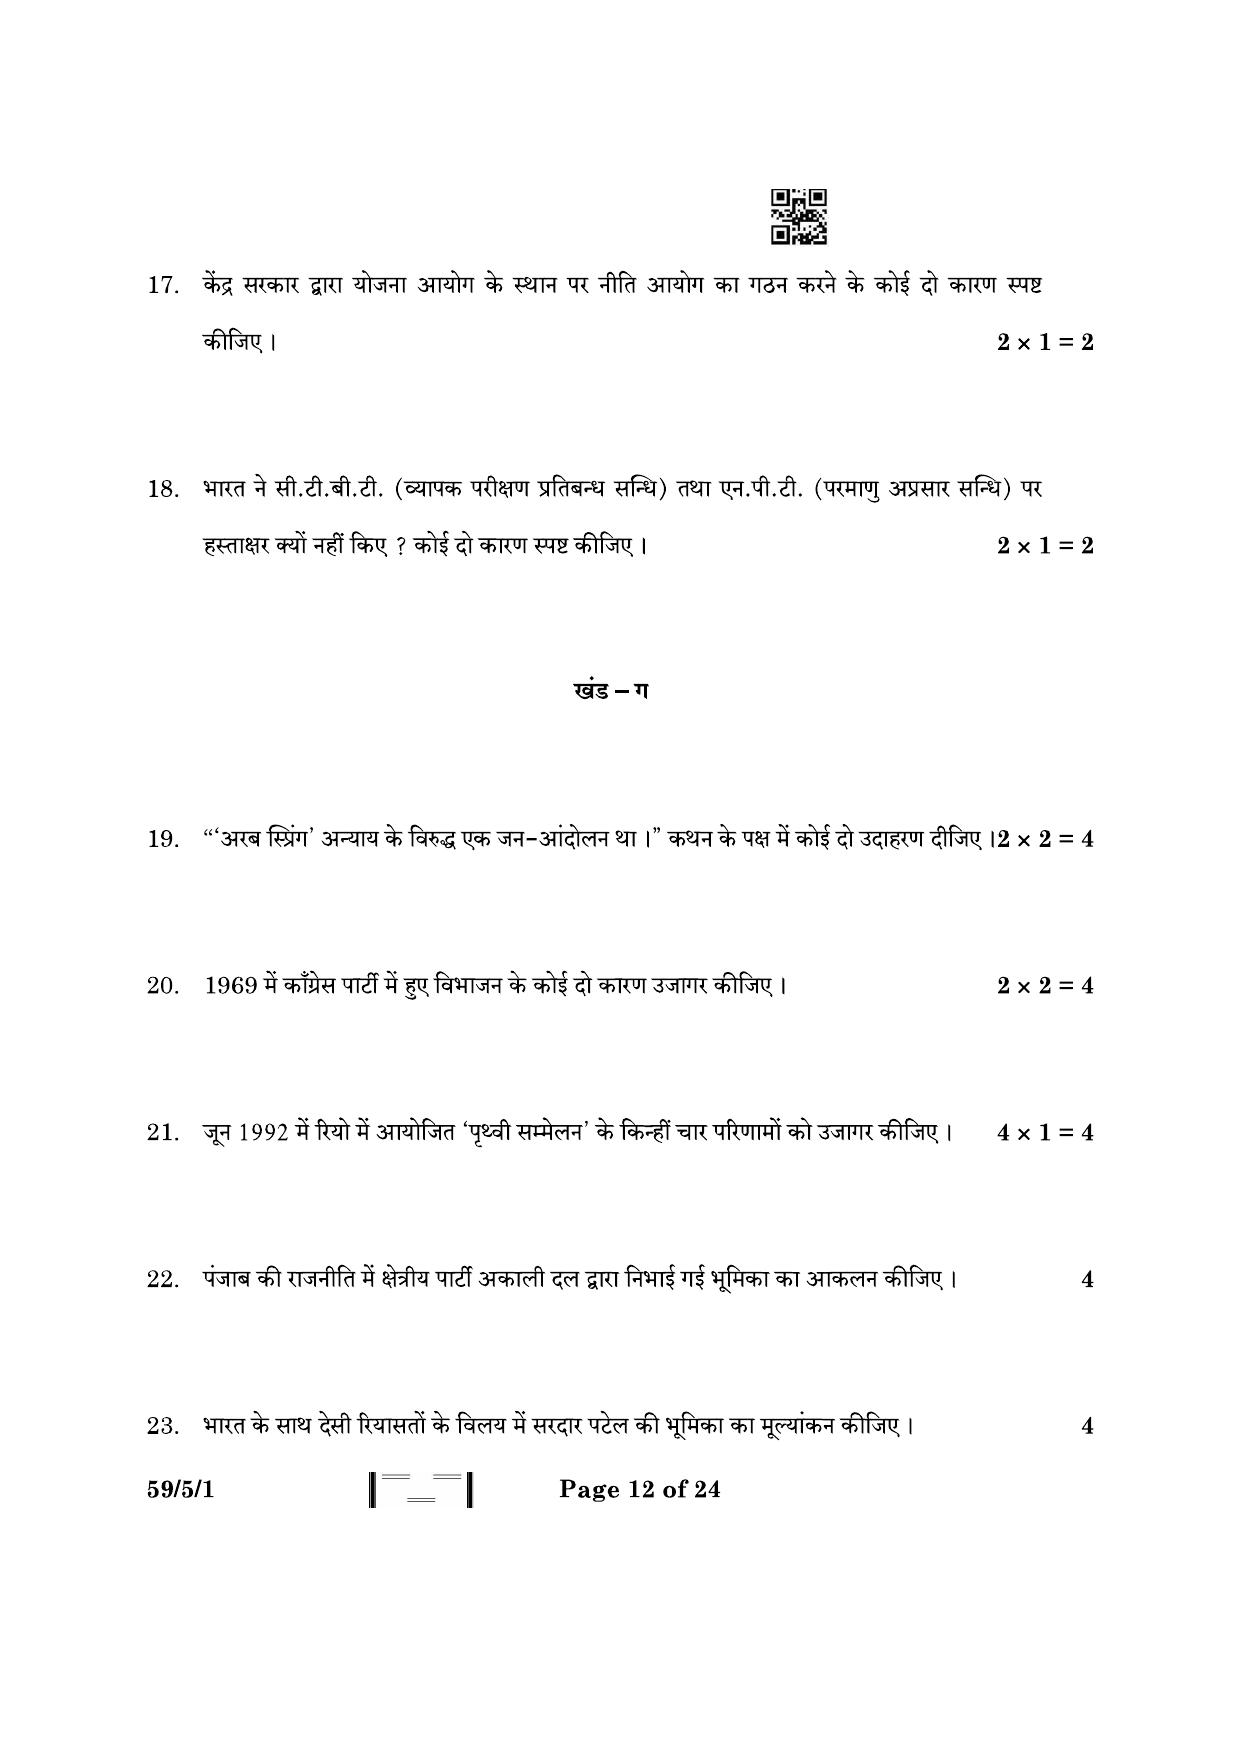 CBSE Class 12 59-5-1 Political Science 2023 Question Paper - Page 12